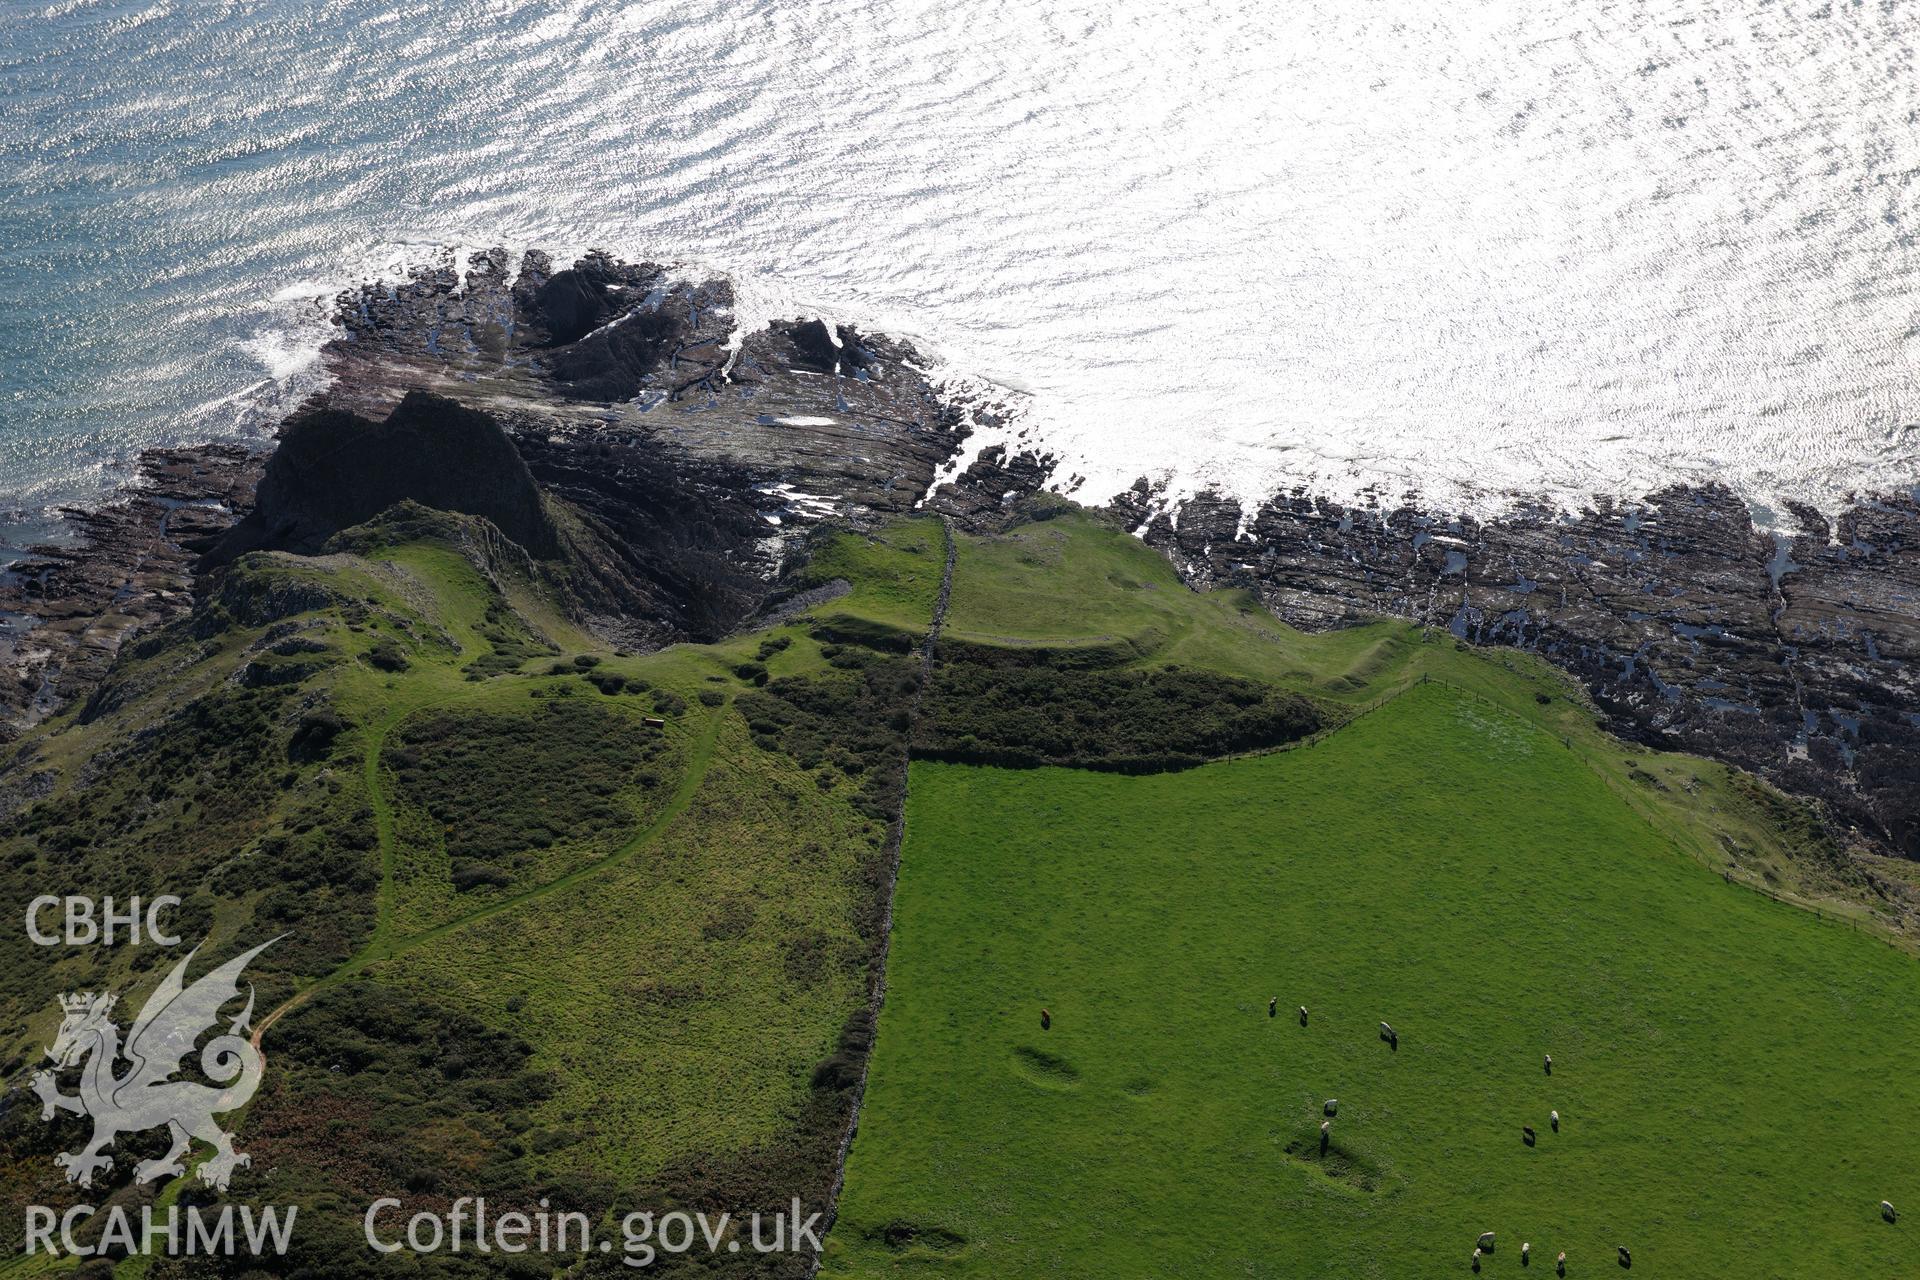 The Knave promontory fort, on the south western shore of the Gower Peninsula. Oblique aerial photograph taken during the Royal Commission's programme of archaeological aerial reconnaissance by Toby Driver on 30th September 2015.